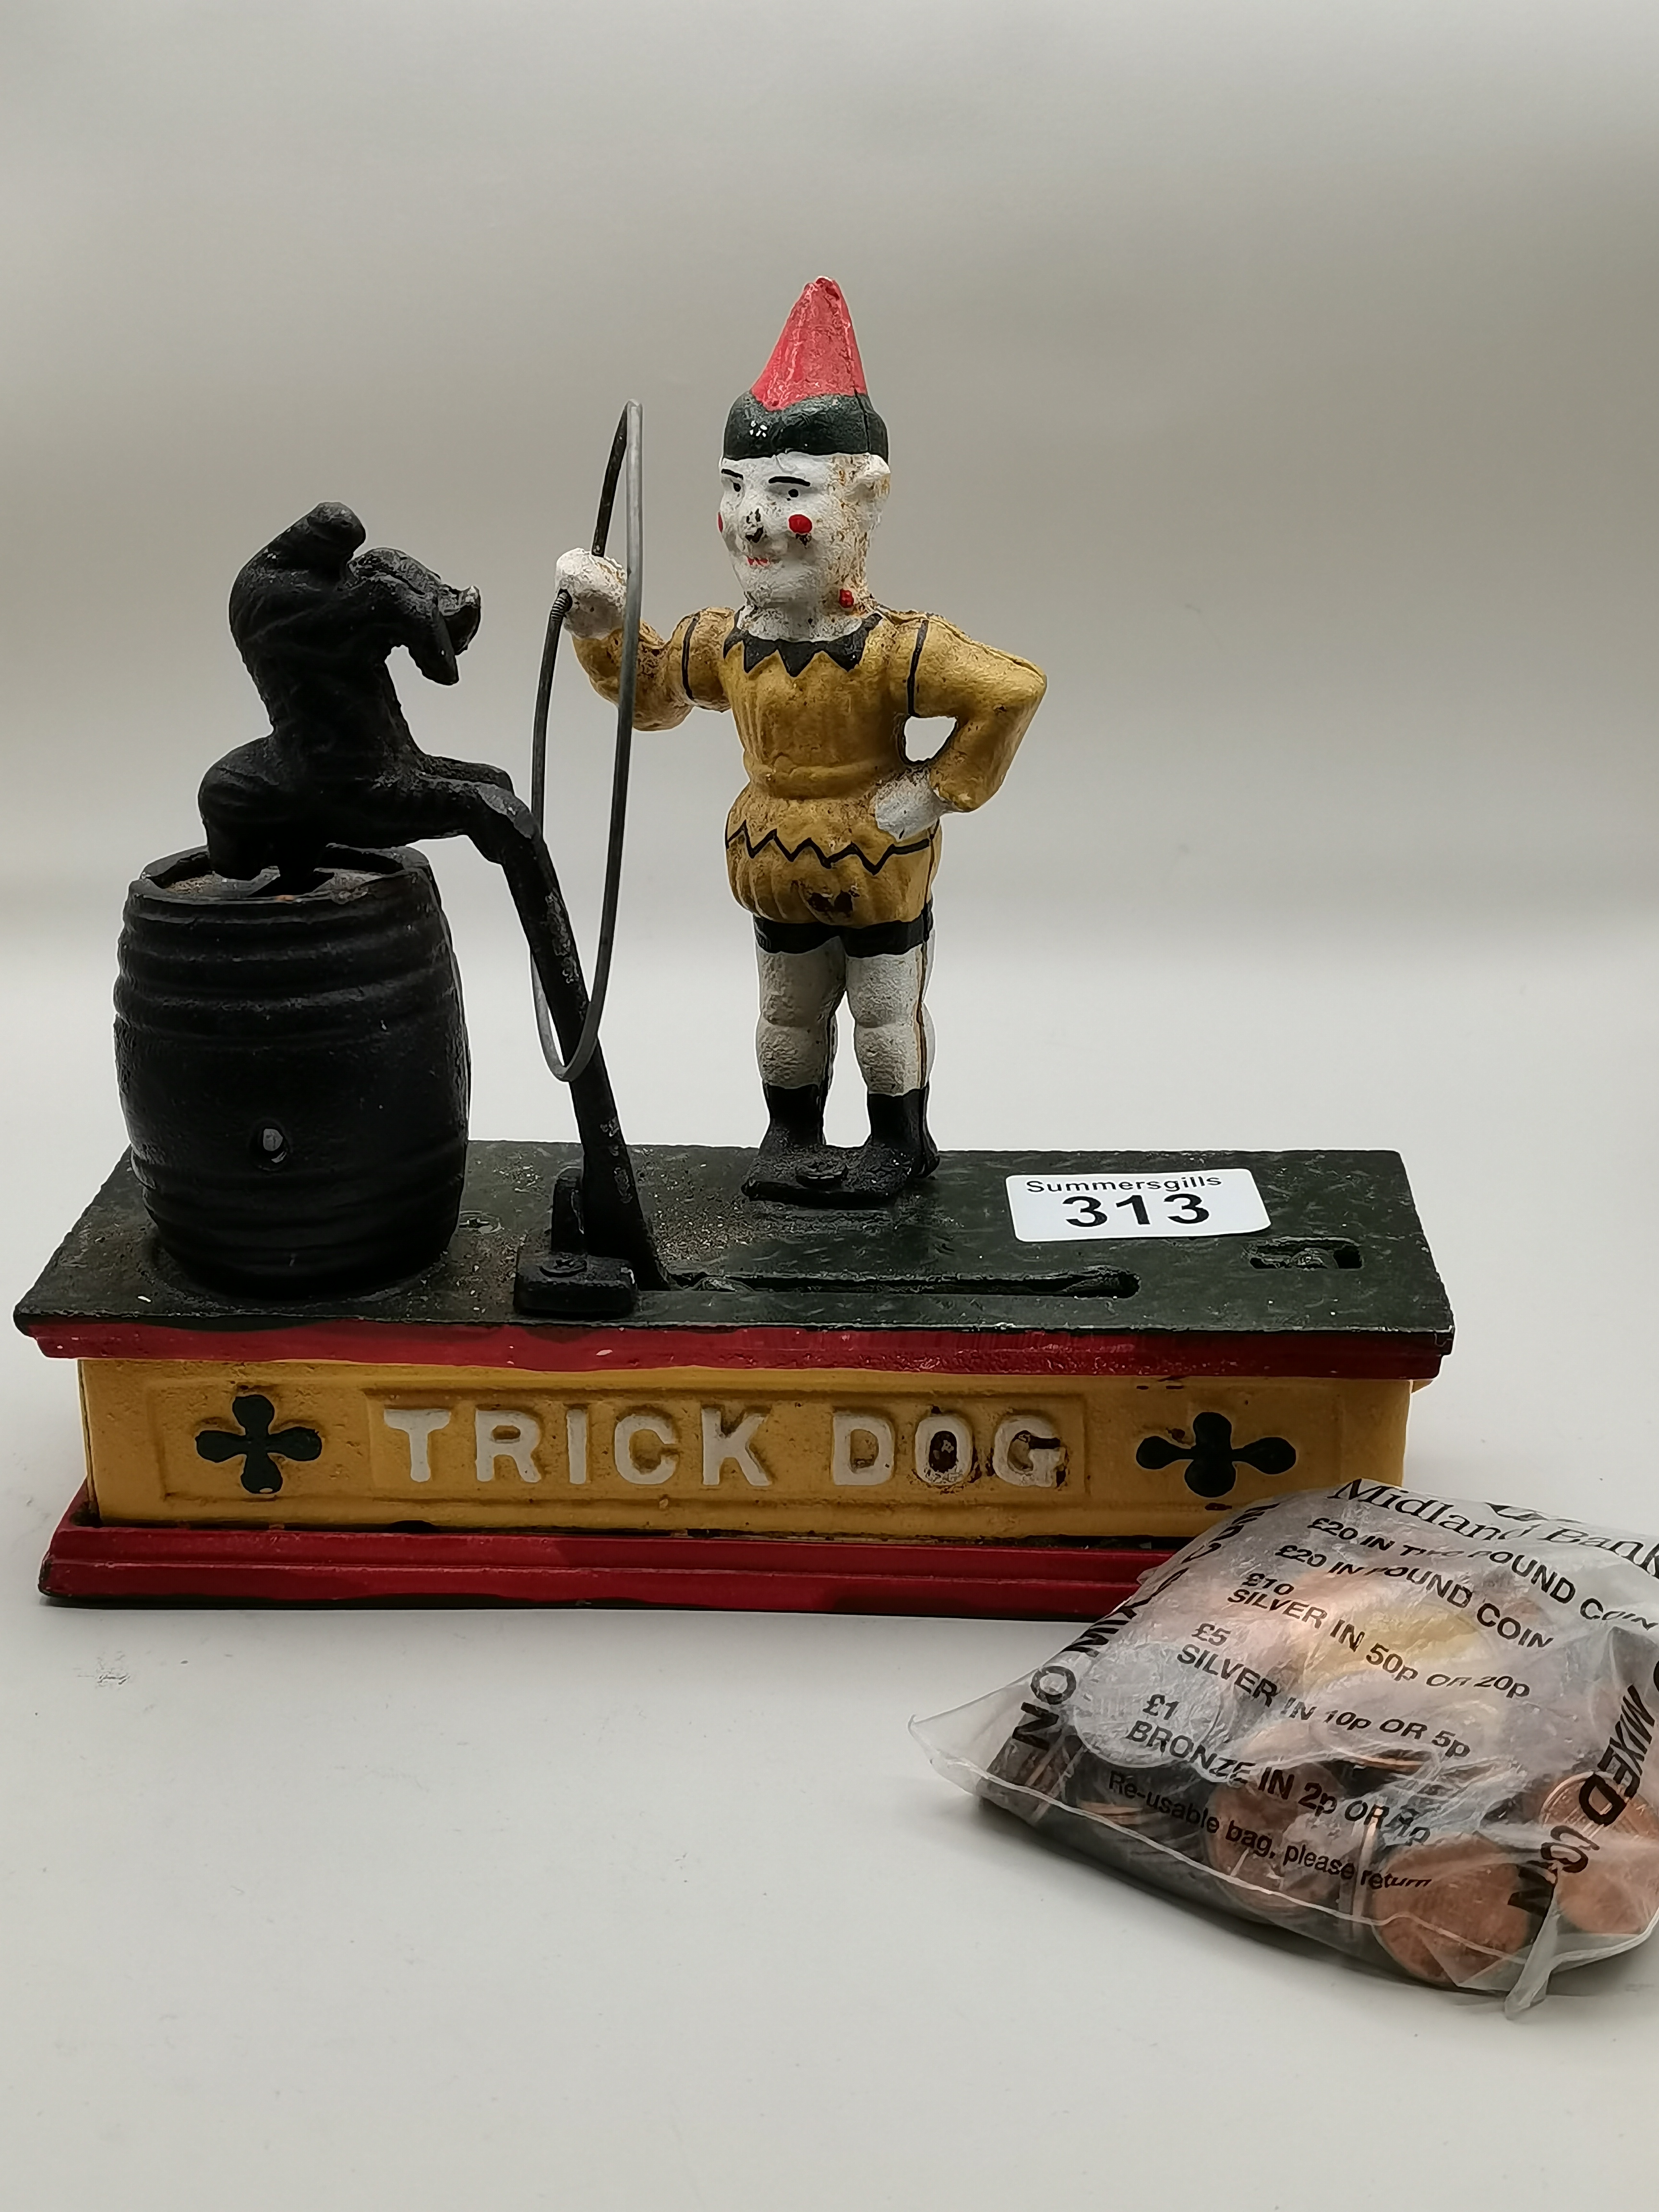 Antique Trick Dog Metal money box and bag of coins